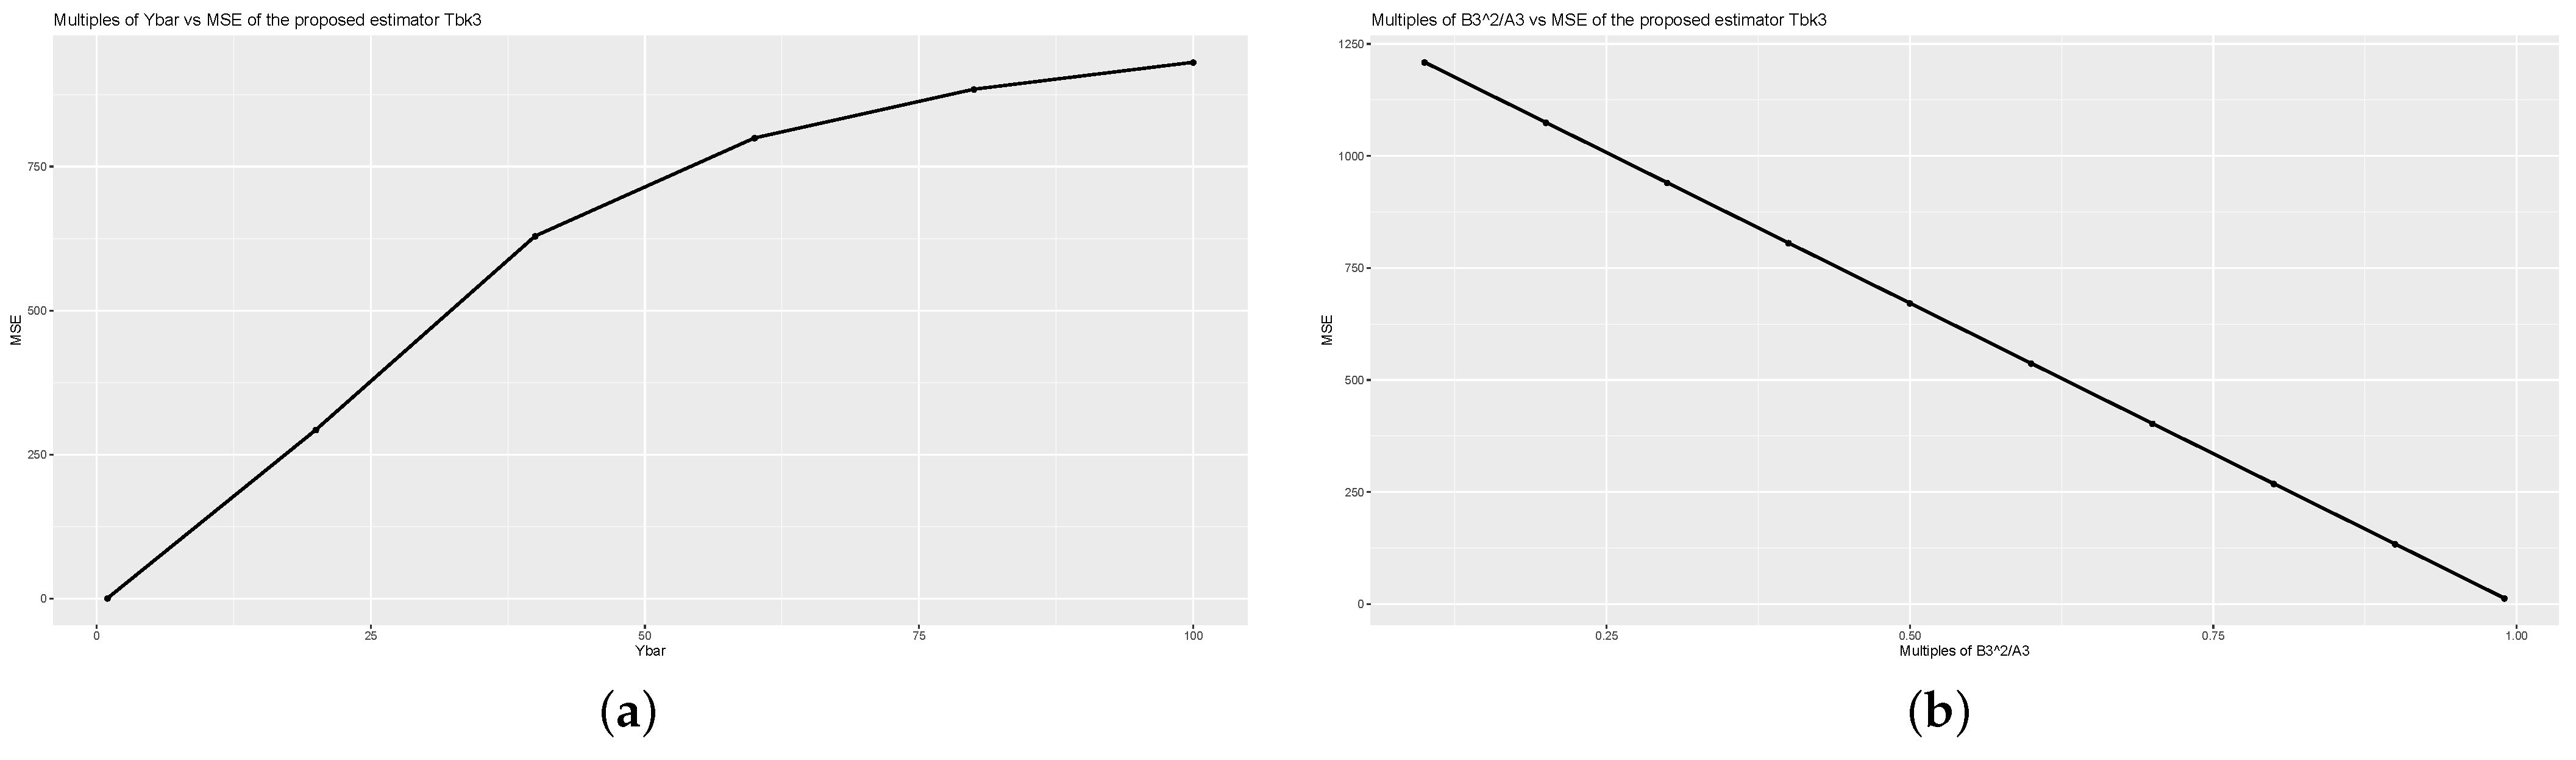 MSE as a function of sample size m for three different estimators